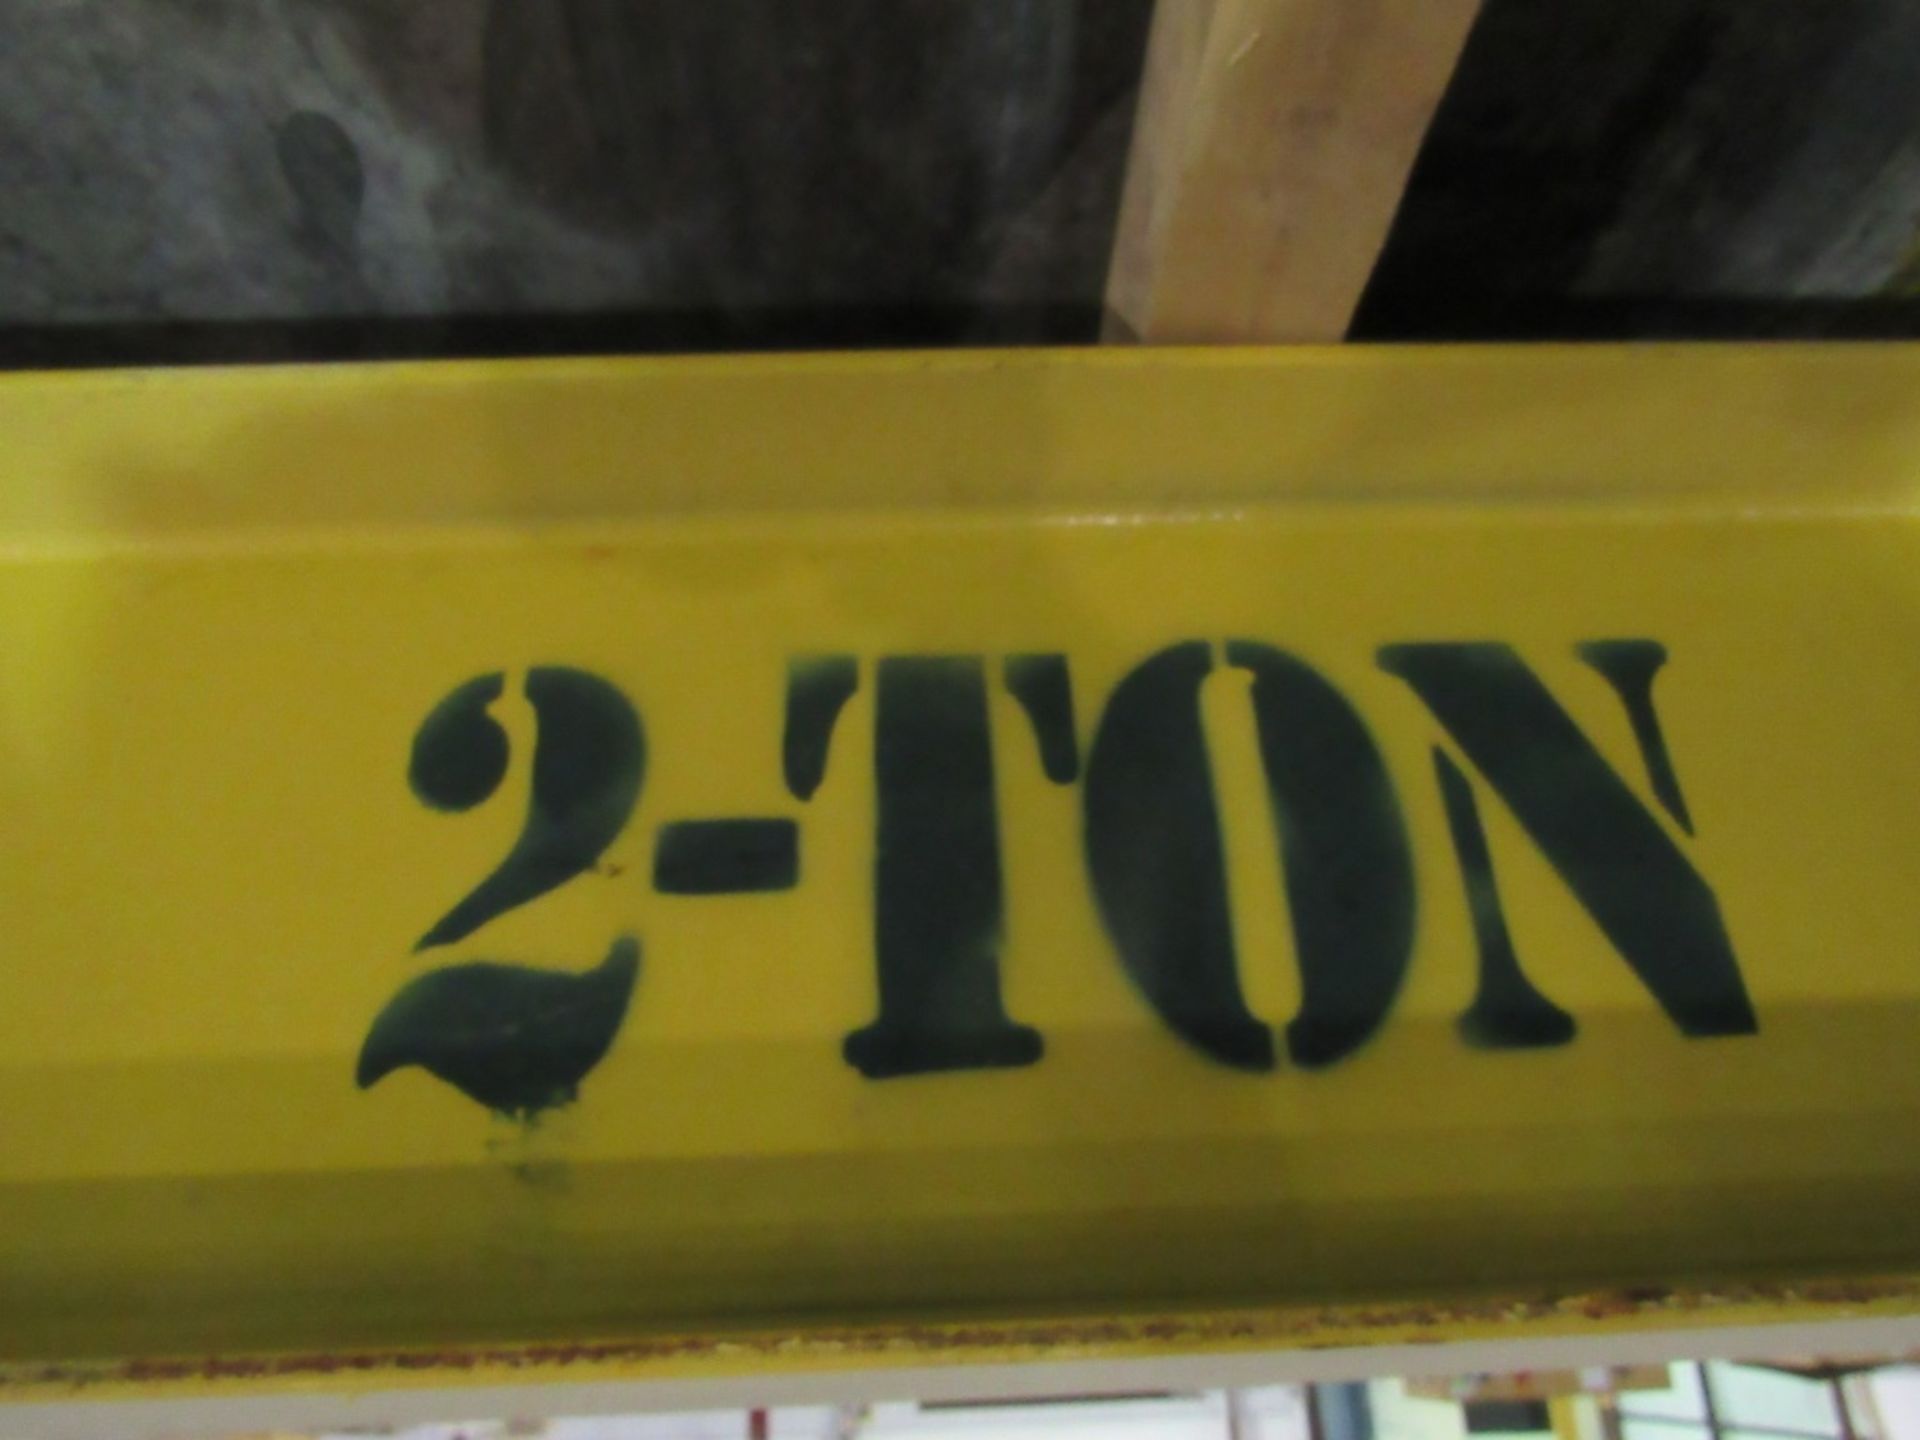 Overhead Crane Parts- ***Located in Cleveland, TN*** MFR - Tragfahigkeit (6) Beams/ Supports 25' x - Image 10 of 10